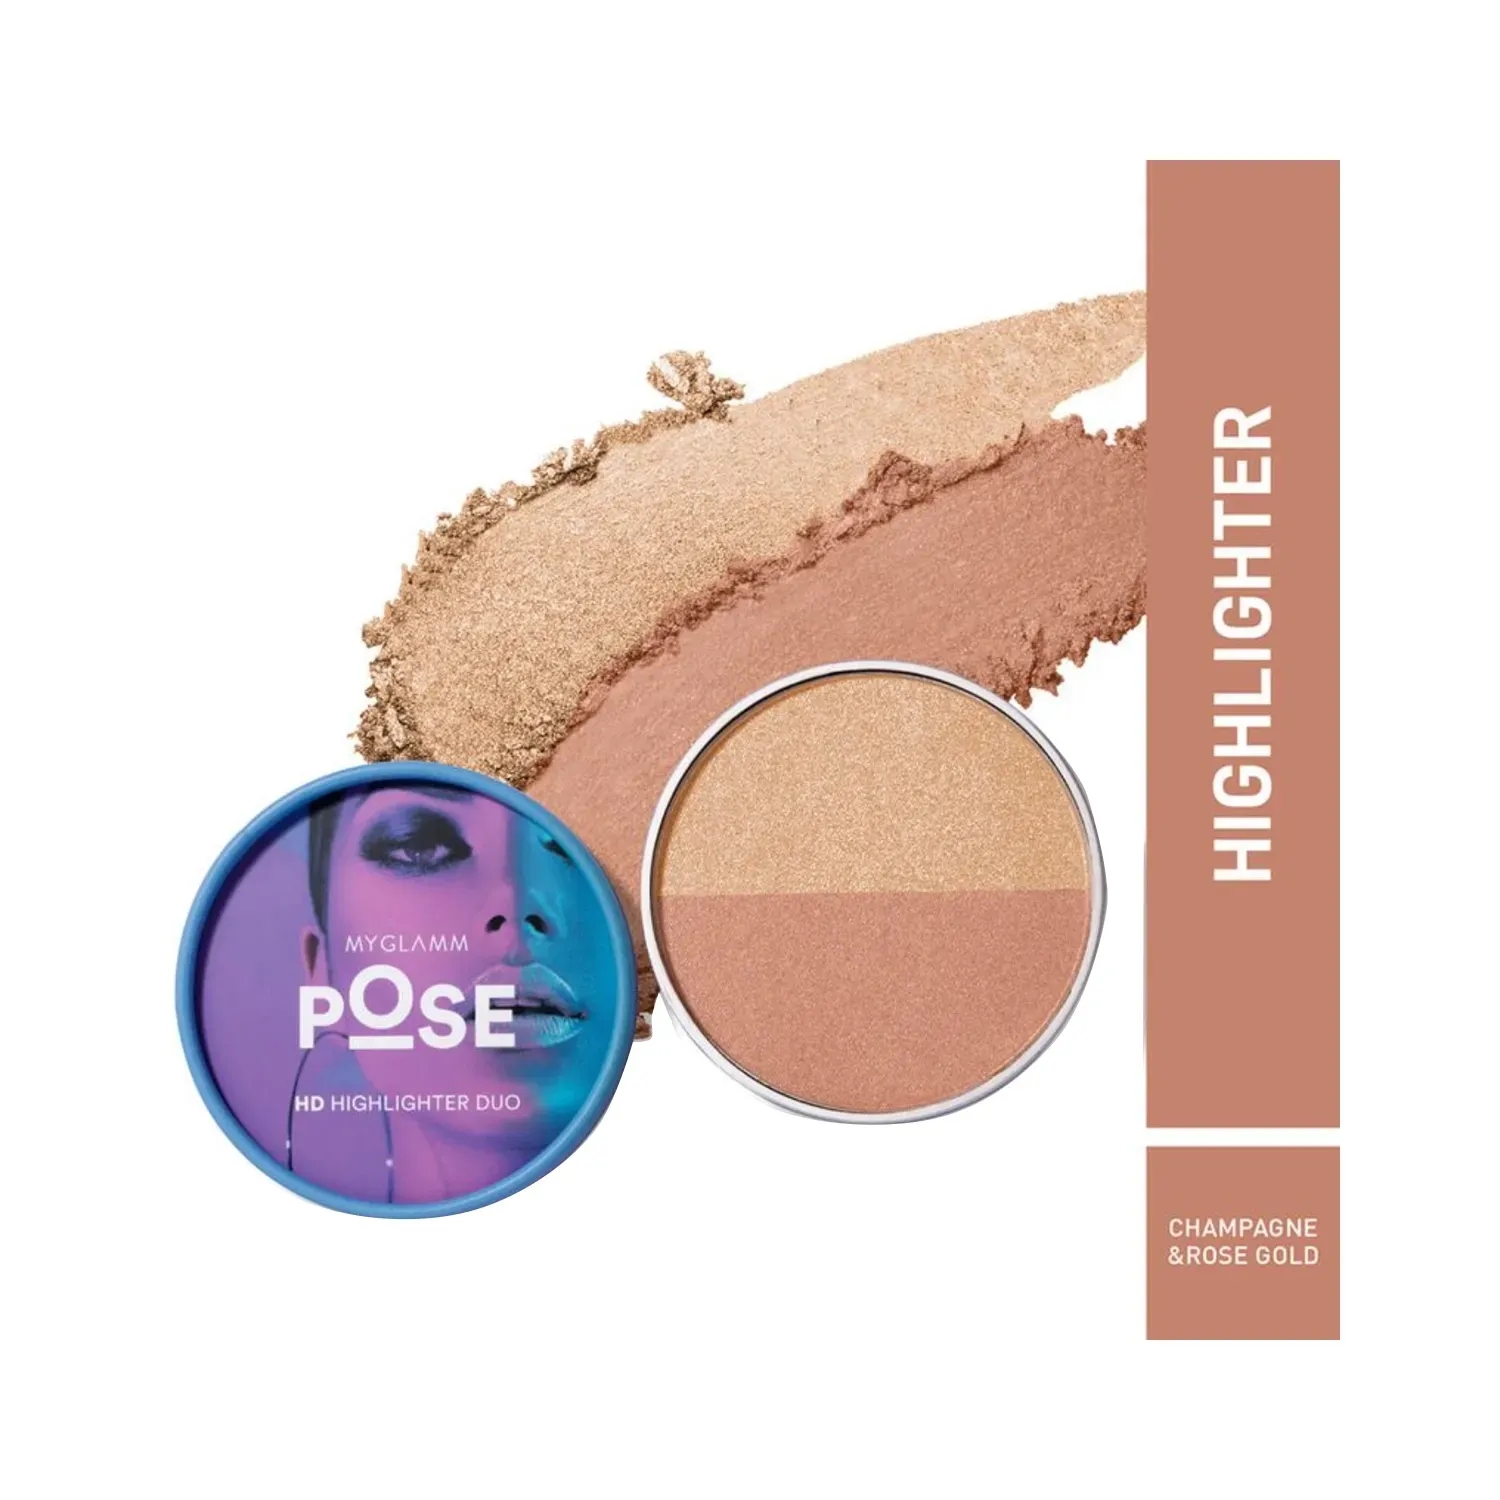 MyGlamm | MyGlamm Pose HD Highlighter Duo - Champagne & Rose Gold (9g)